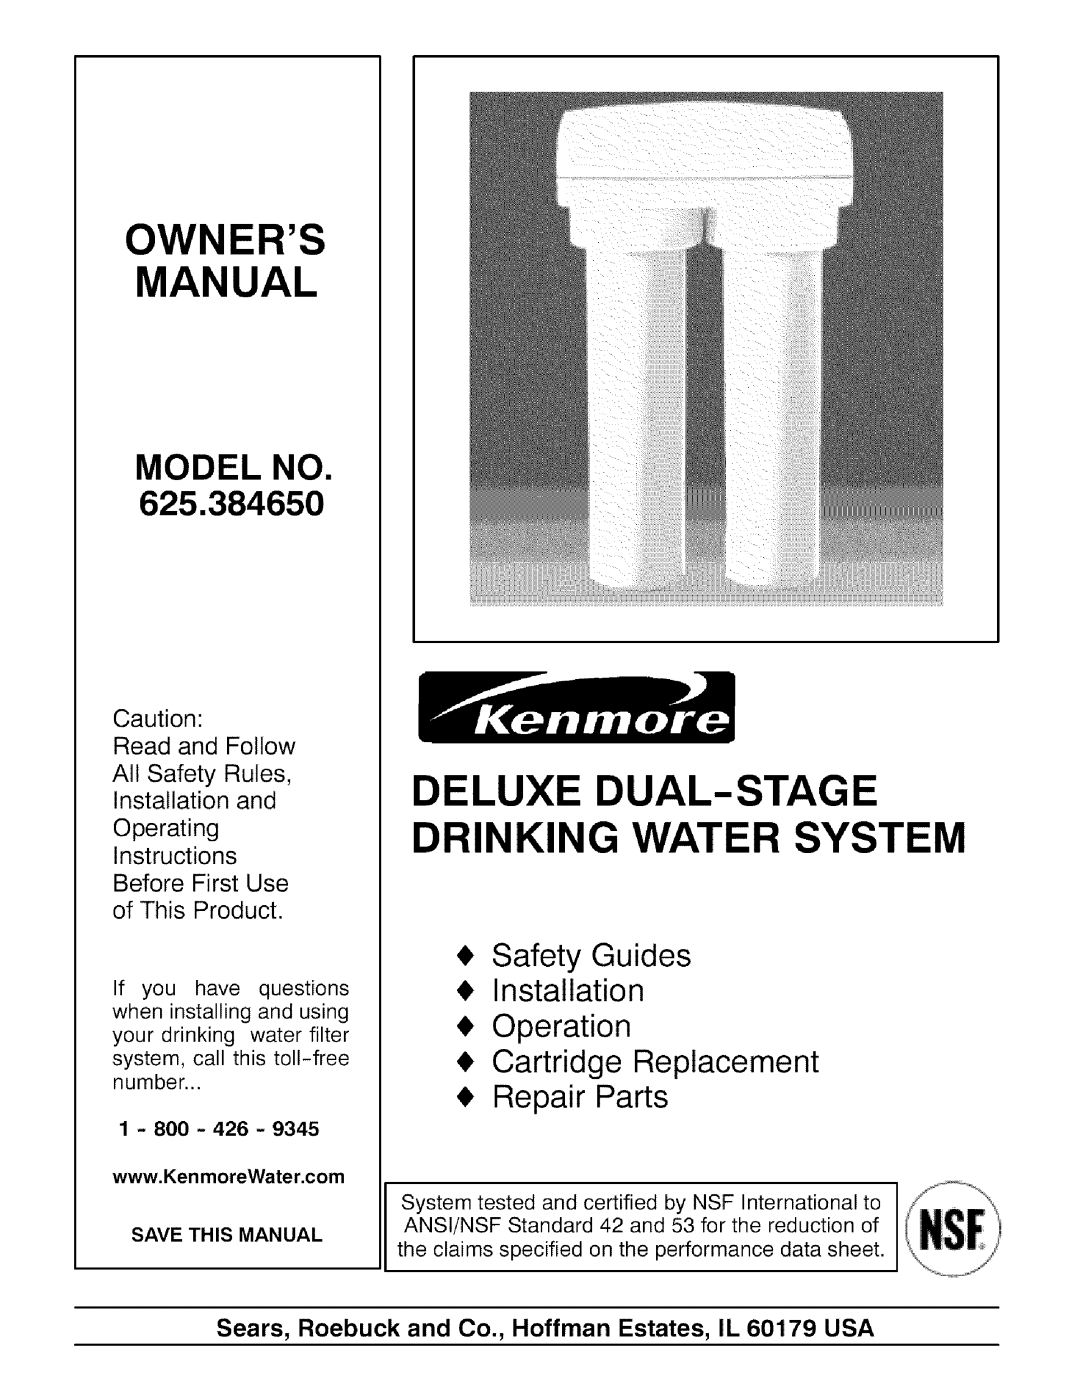 Kenmore 625.384650 owner manual Owners Manual, Deluxe Dual-Stage Drinking Water System, Model No, Repair Parts 